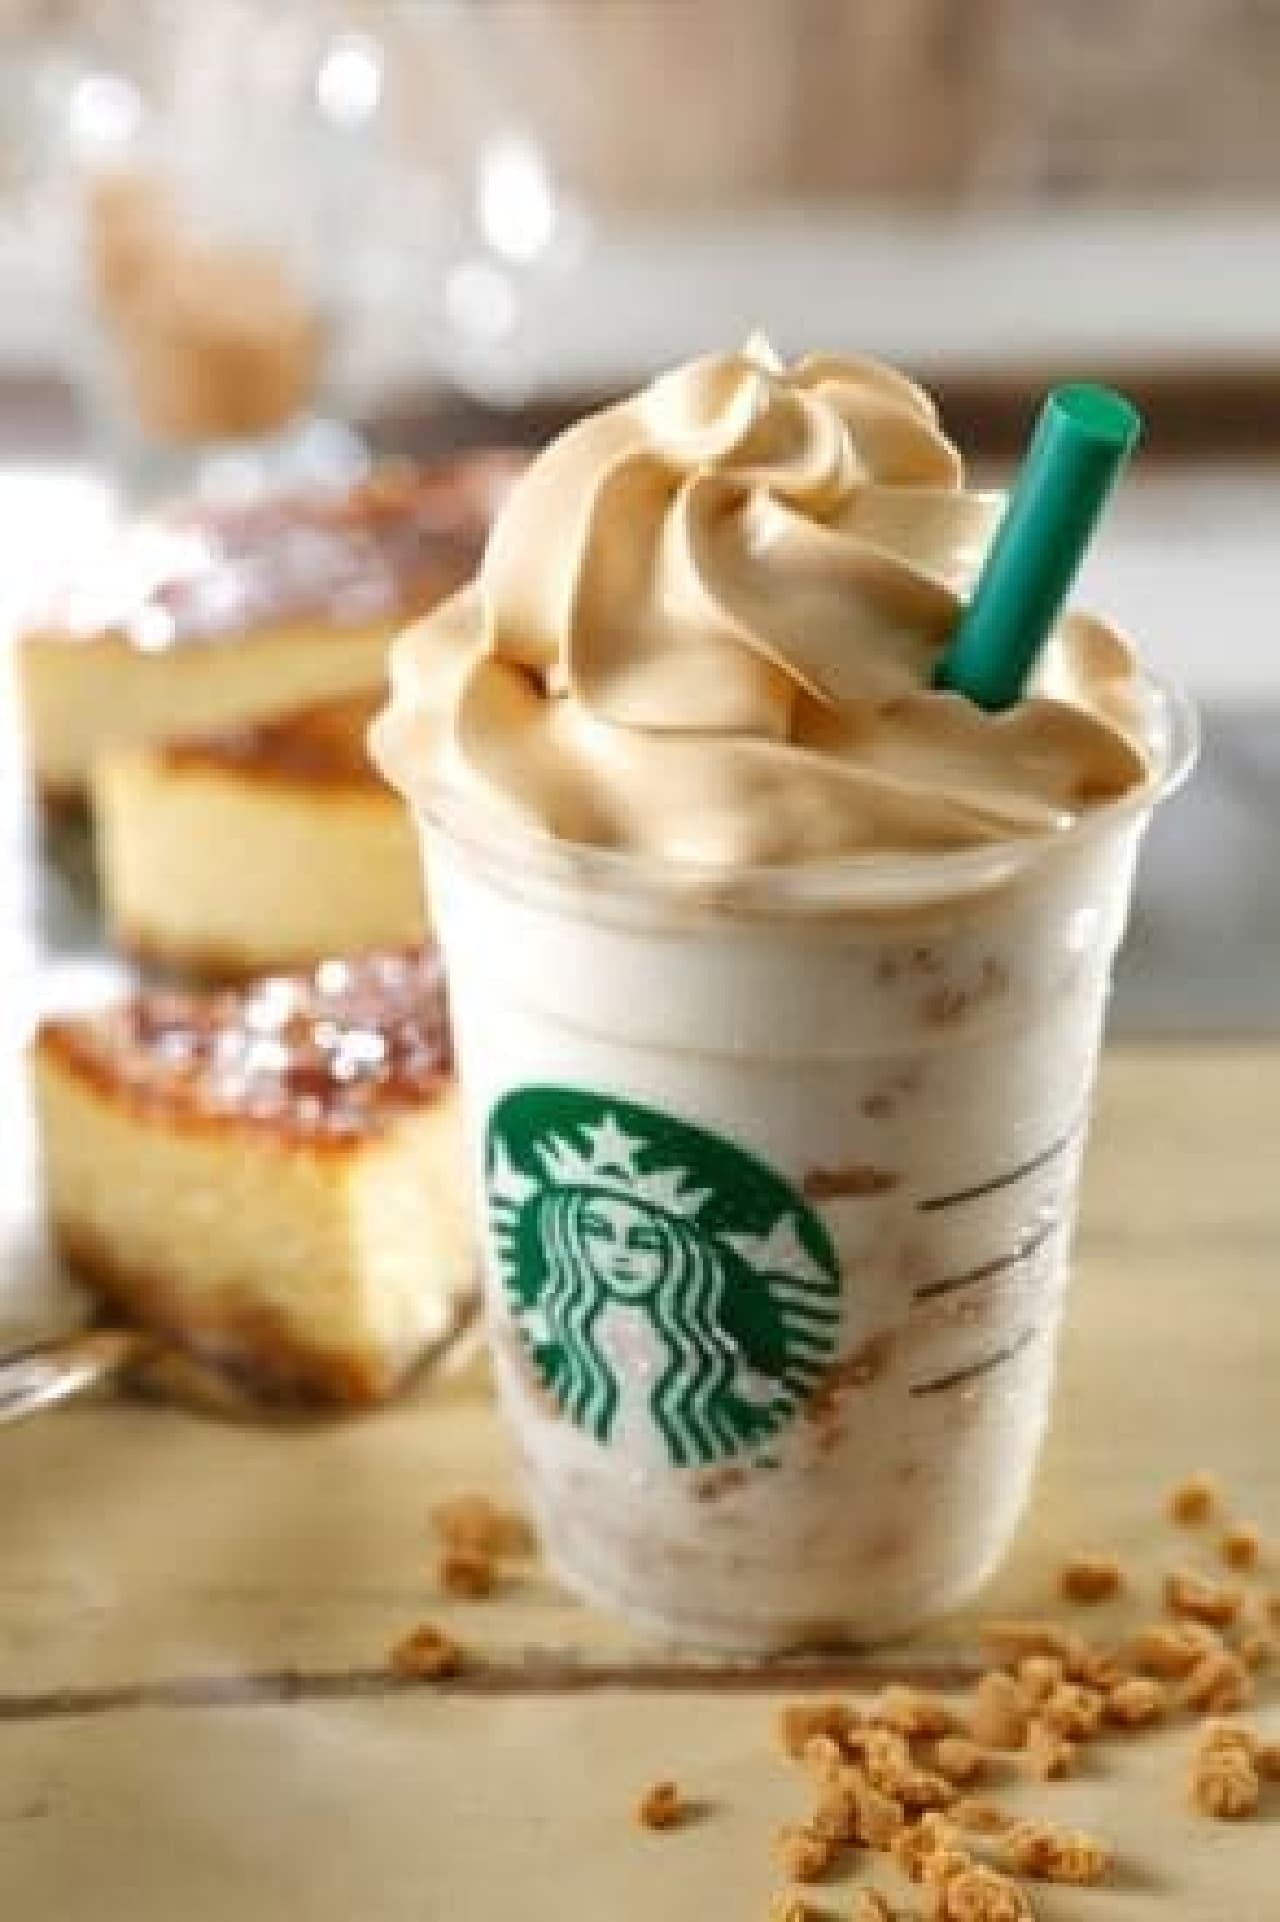 "Baked Cheesecake" frappe is now available at Starbucks!